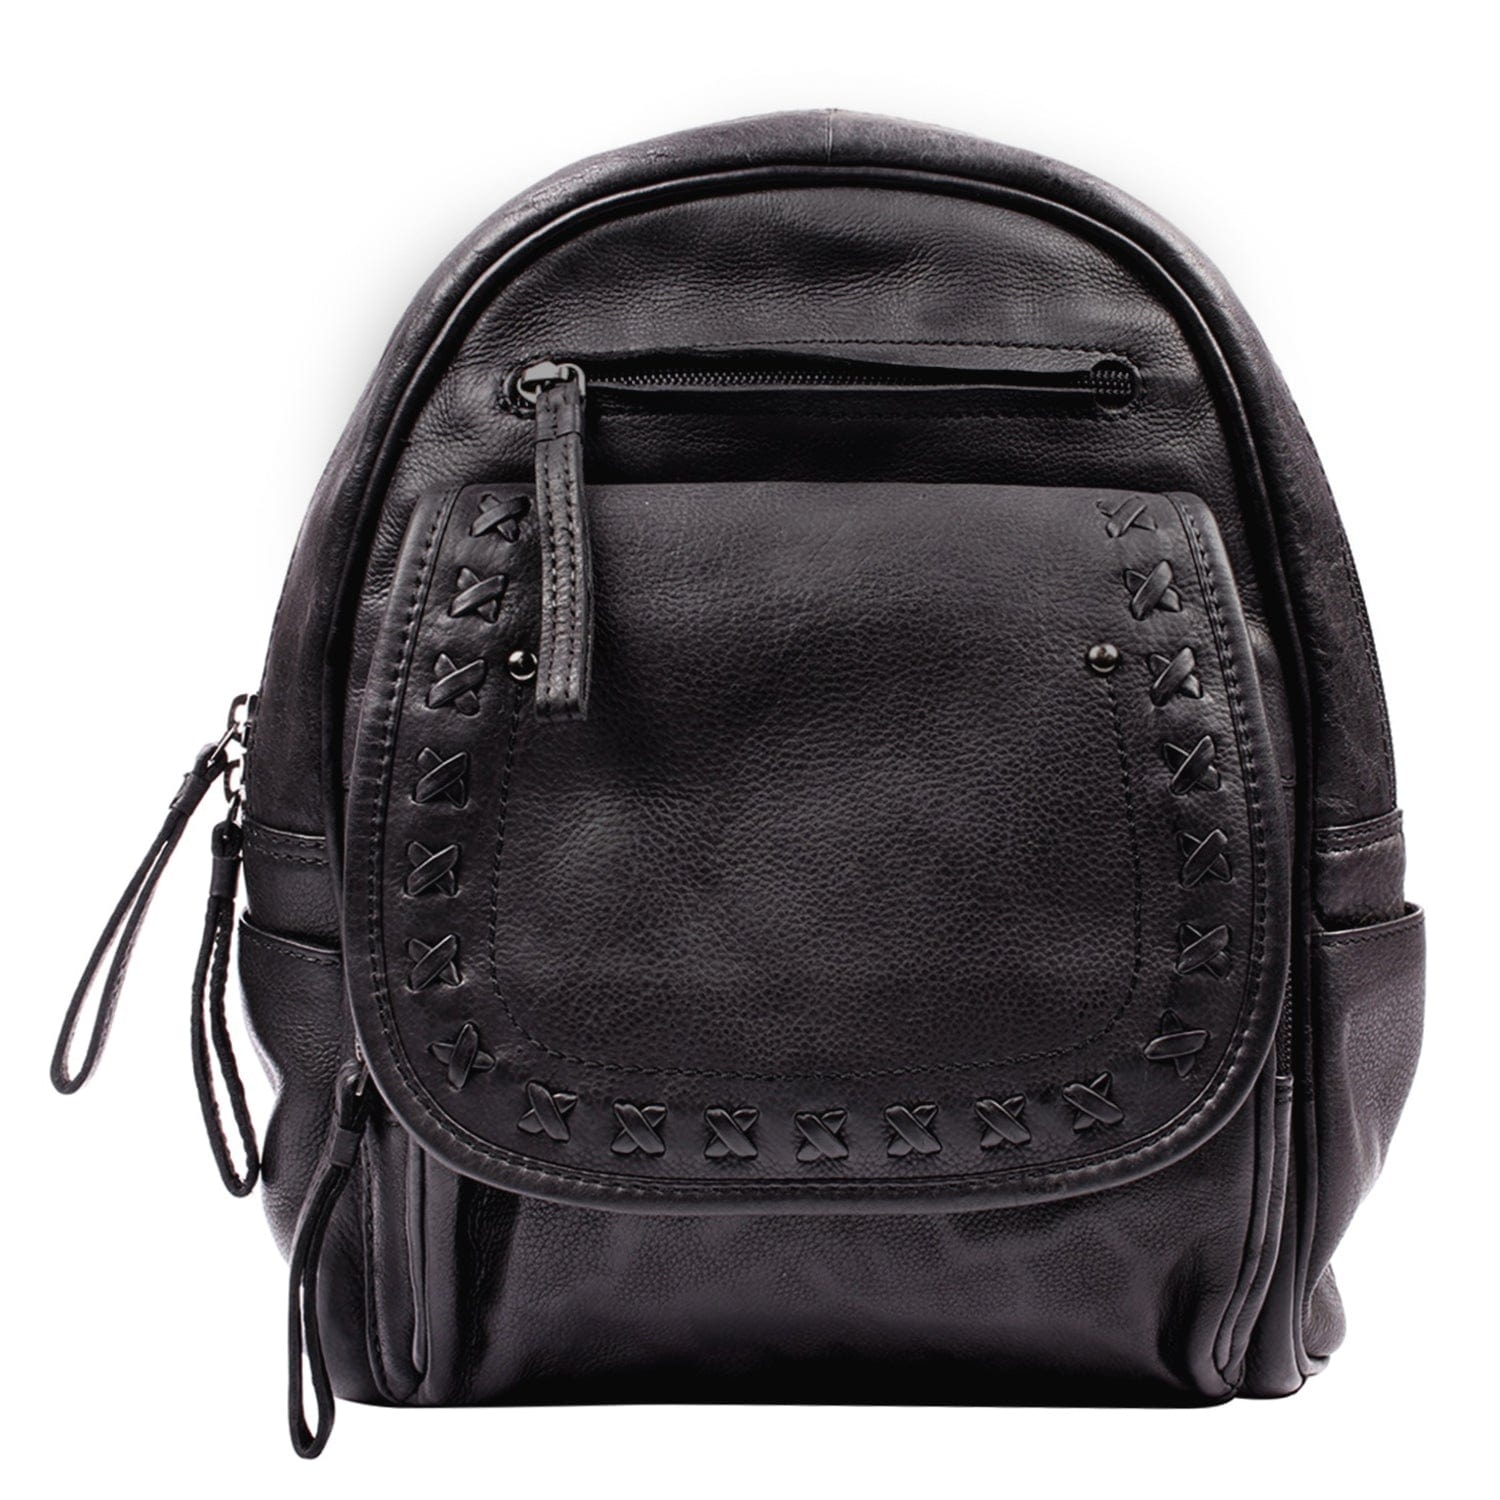 Concealed Carry RFID Daisy Leather Backpack -  Locking Concealment Bag for Pistol -  Outdoors Gun Bag -  Women's Conceal Carry Purse for Firearm -  Women Gun Users -  gun carrier backpack -  best gun carrying backpack-  best gun carry backpack -  Pistol and Firearm Bag -  Western Hide Backpack -  Boho Stylish Backpack for Women -  Universal Holster Bag -  Marley Unisex Backpack - Women's Concealed Carry Bagpack -  premium leather backpack